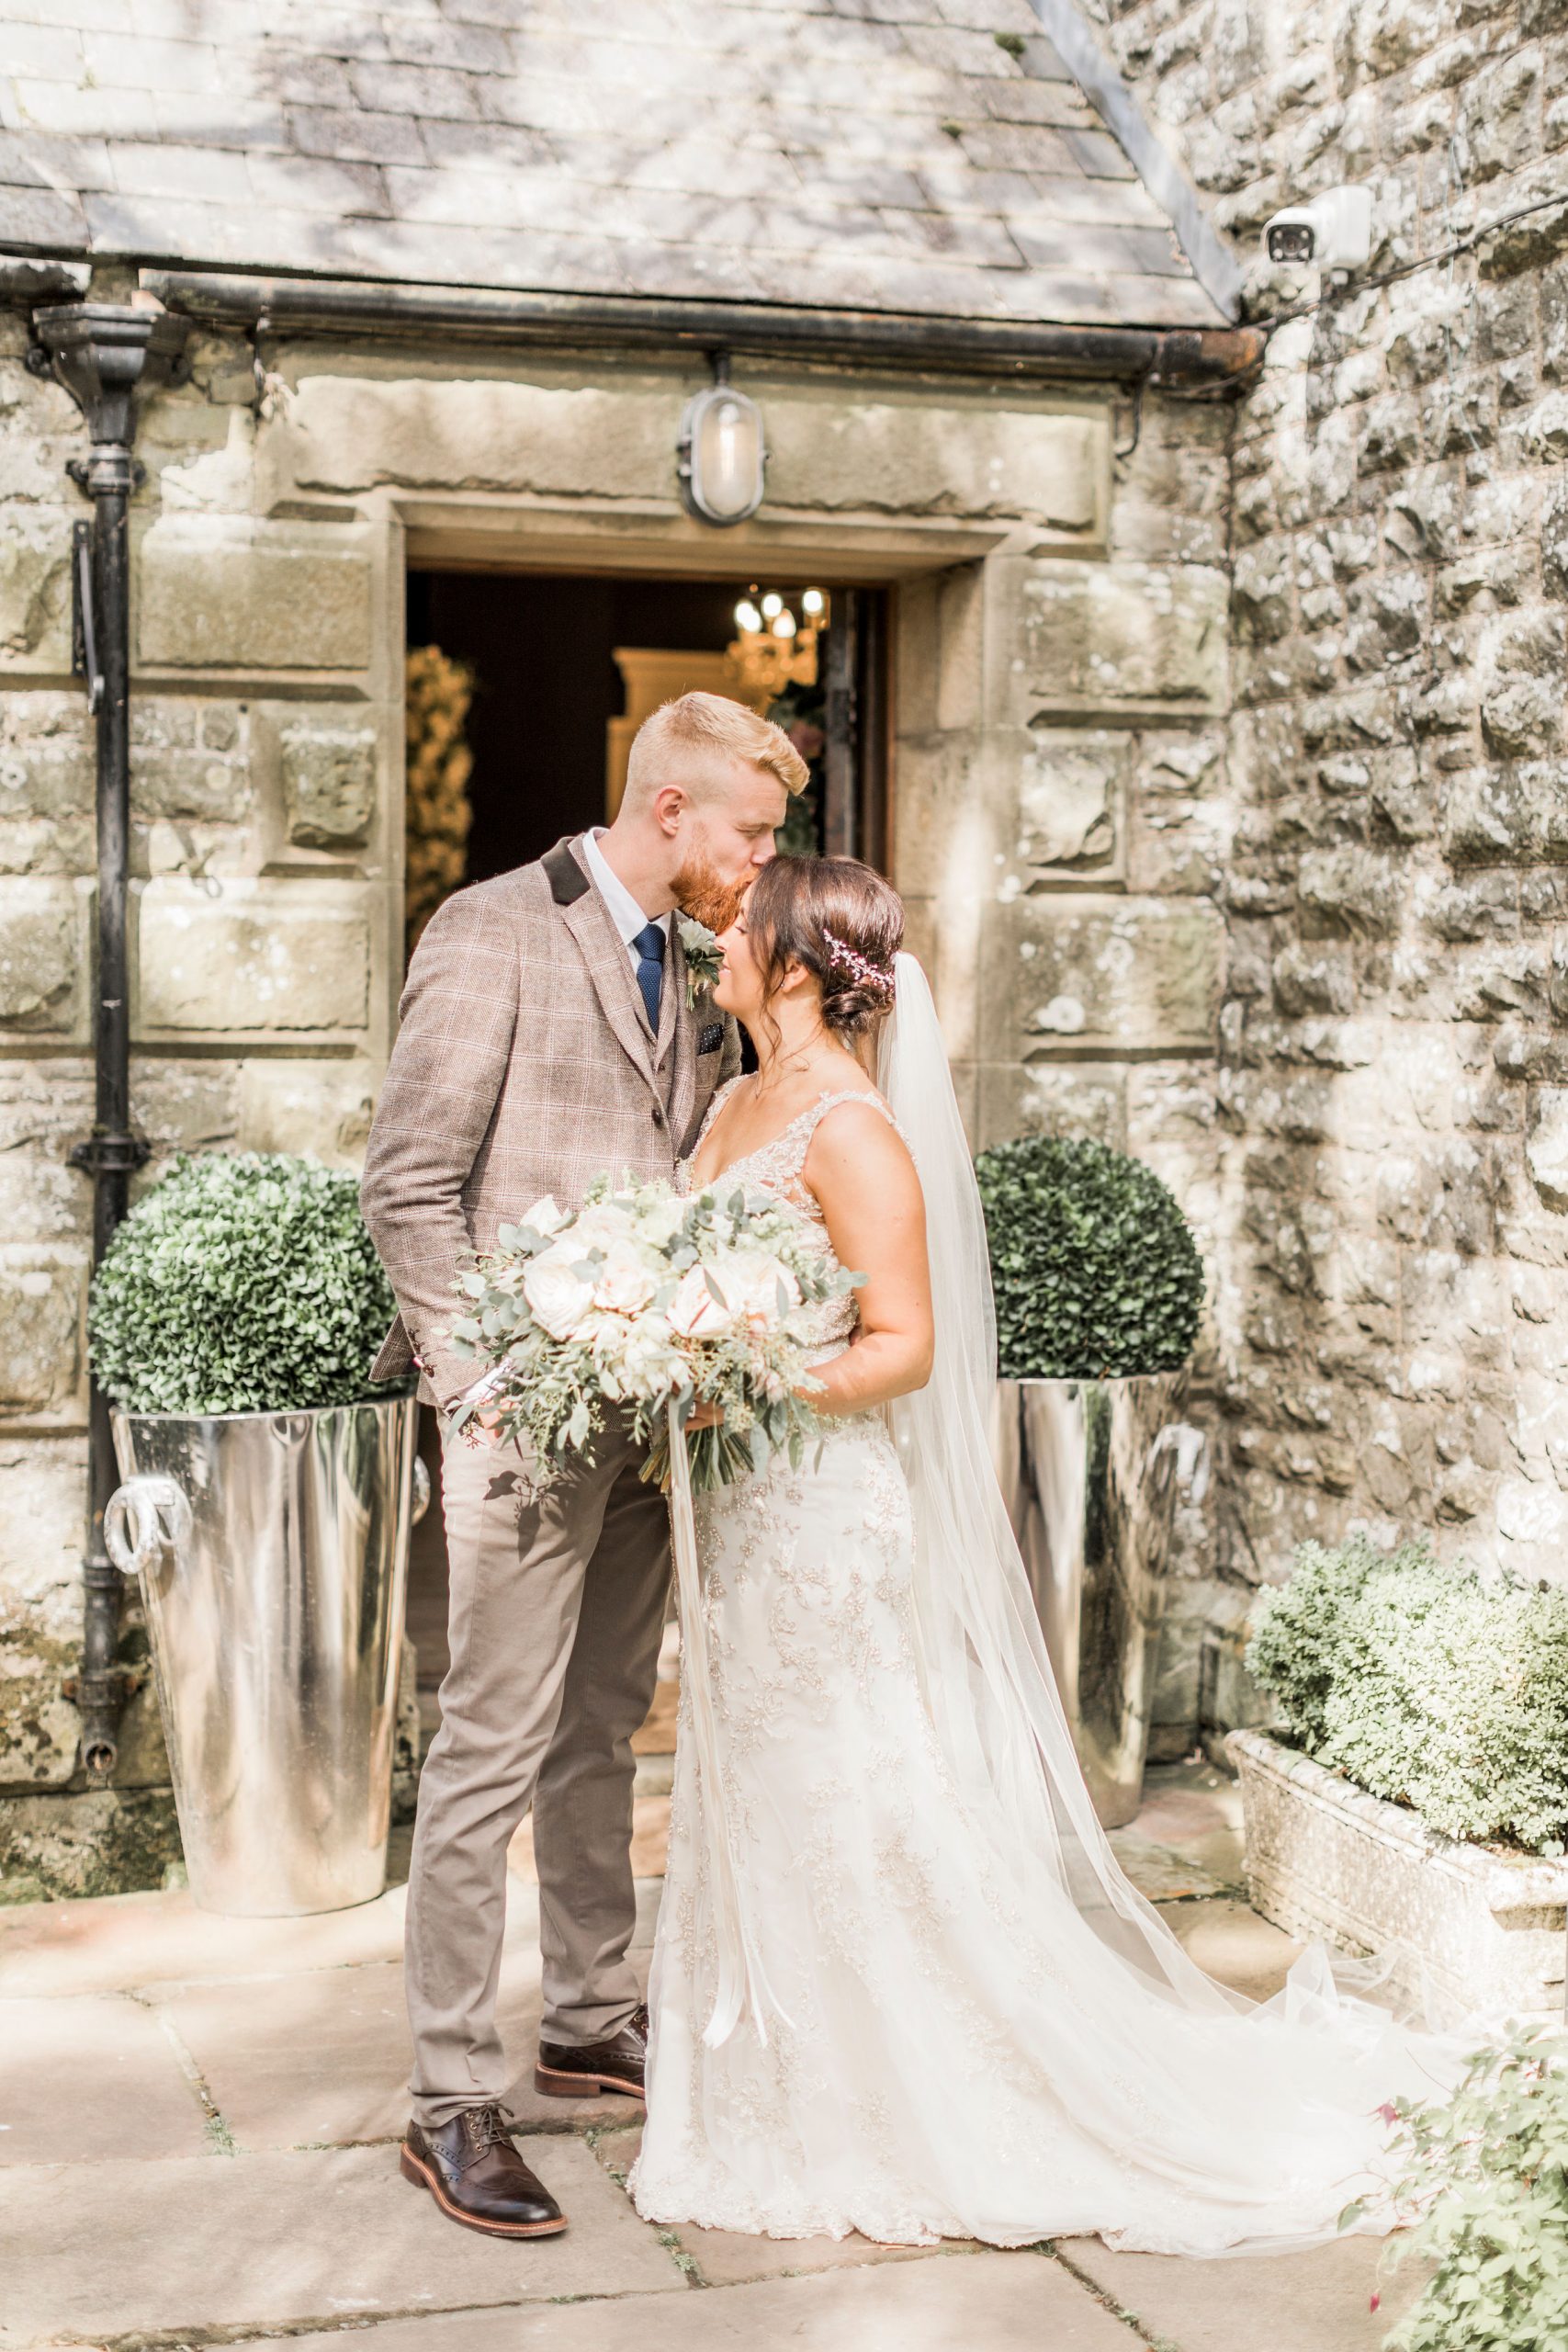 Wedding At Woodhill Hall, Northumberland - Kayleigh and Paul - Katy Melling Photography